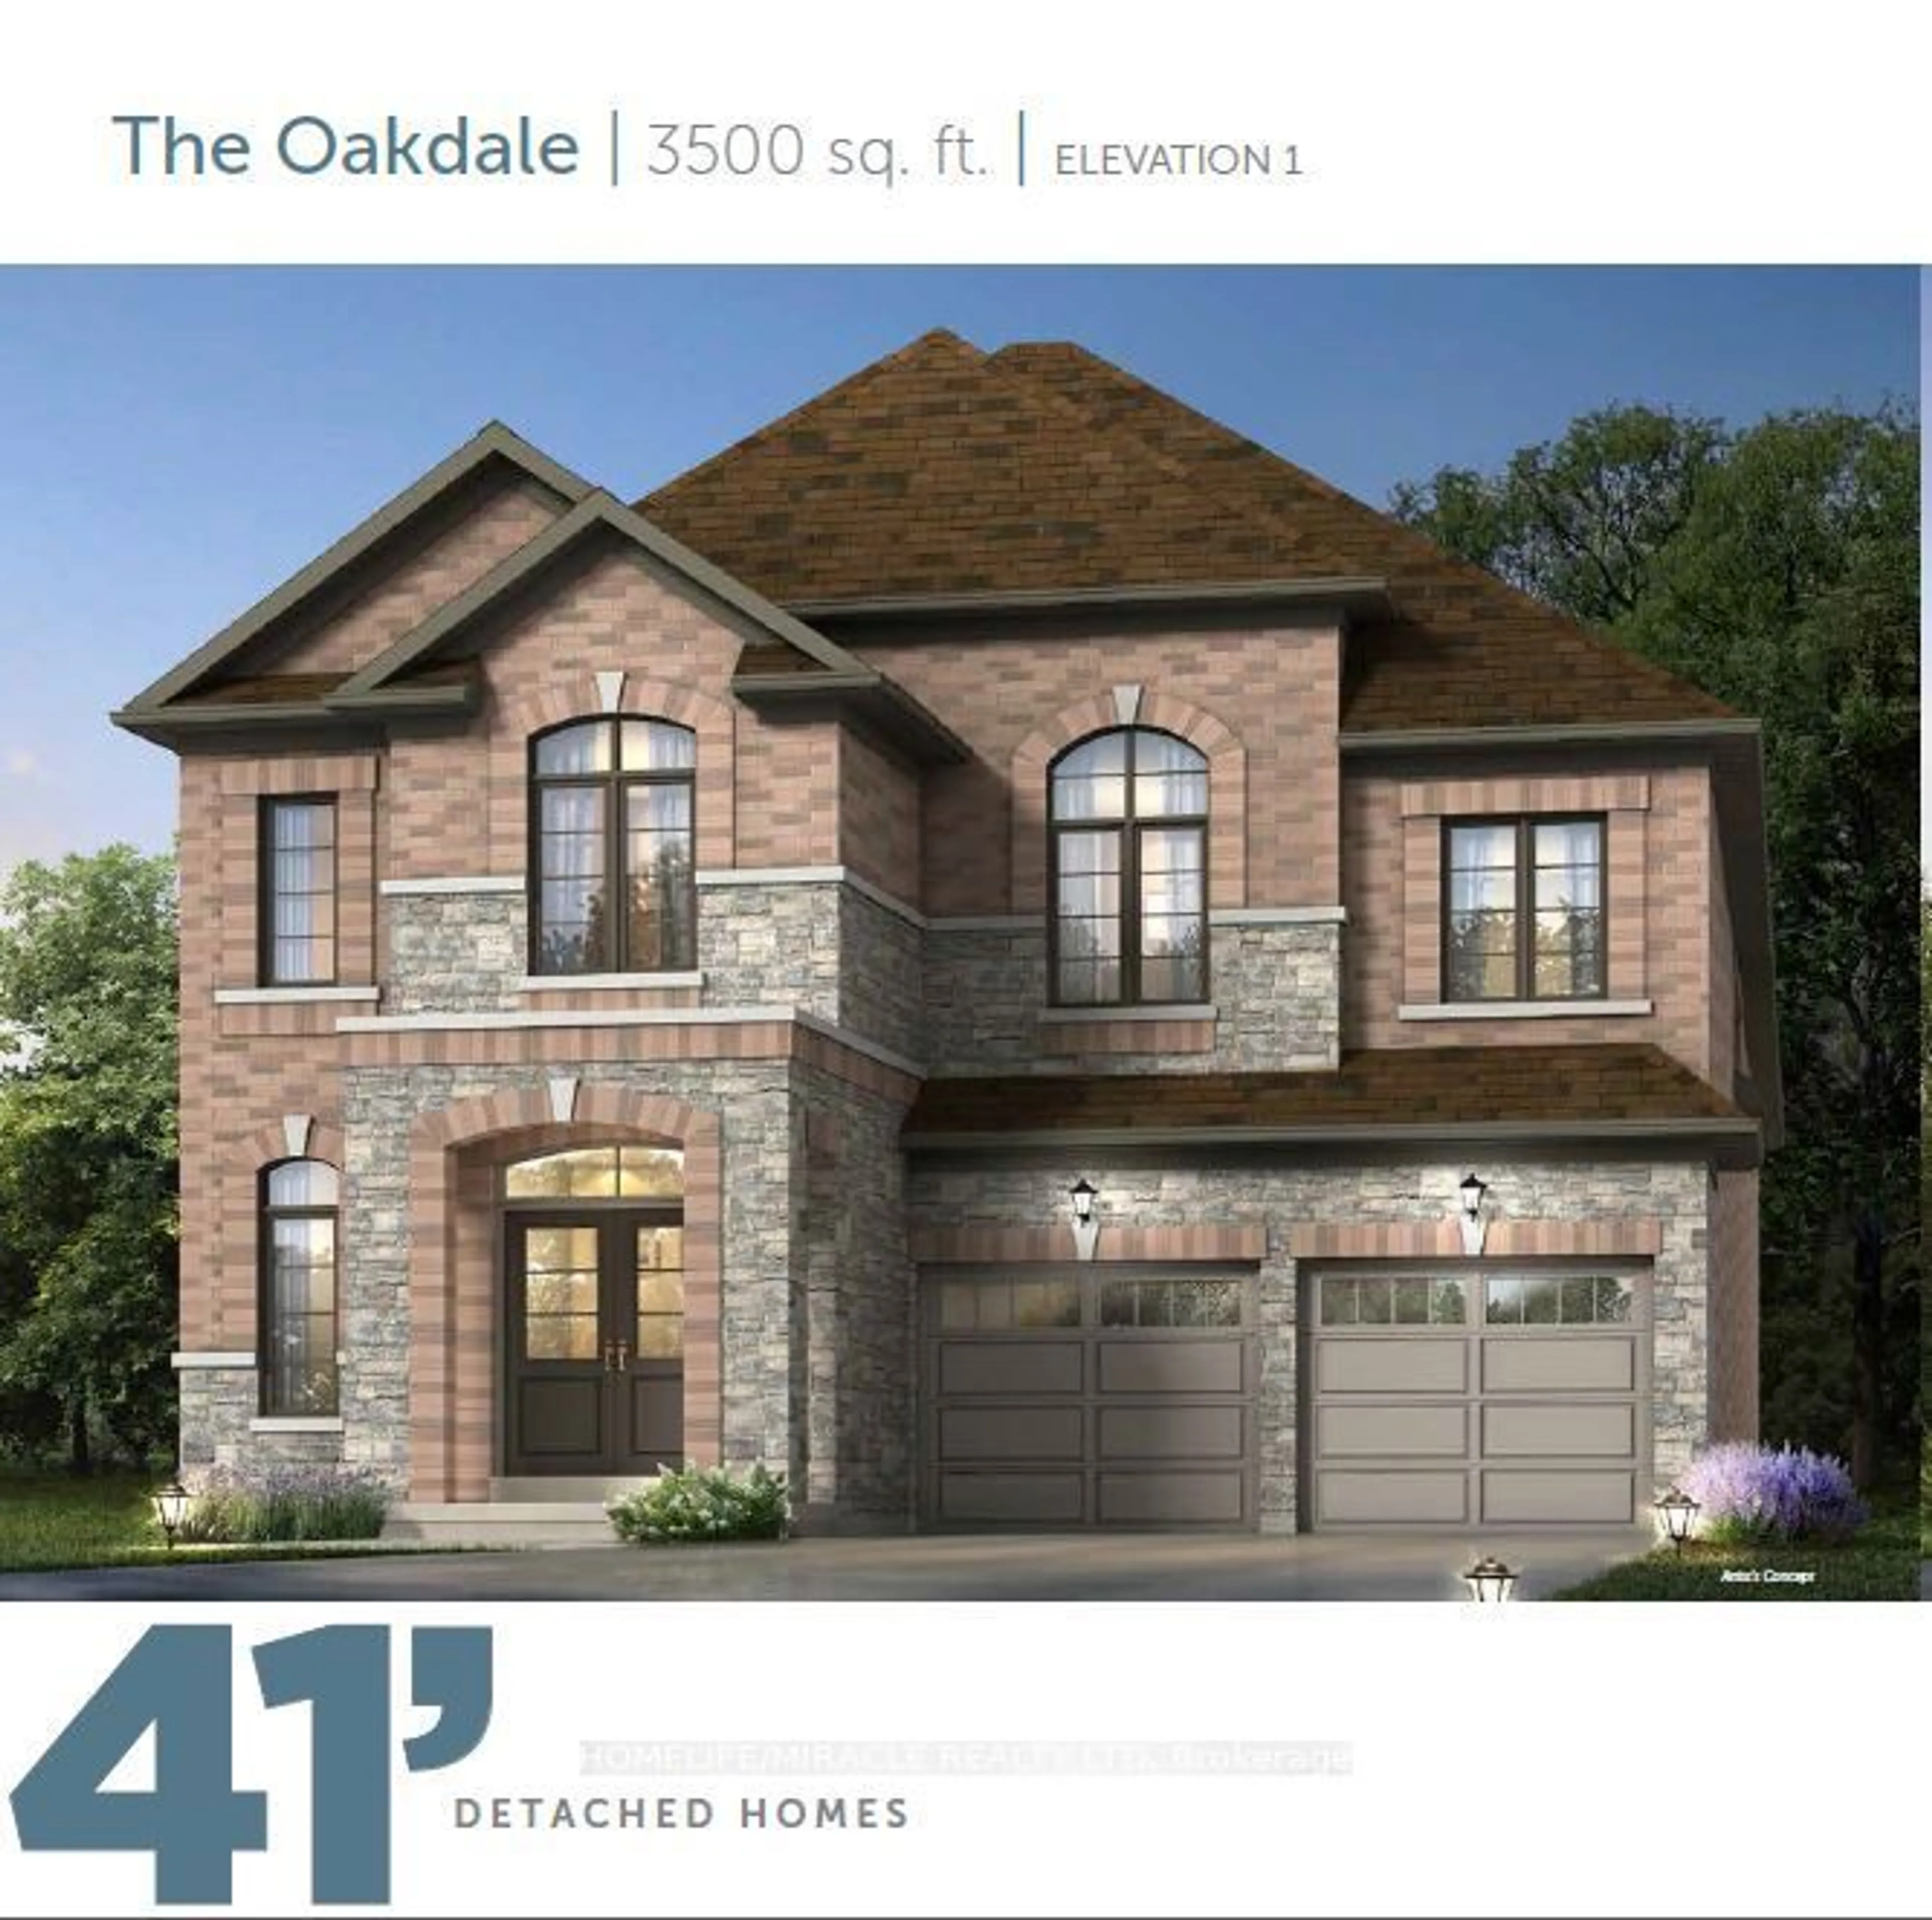 Home with brick exterior material for 8 Fuller St, Brampton Ontario L6X 5S4